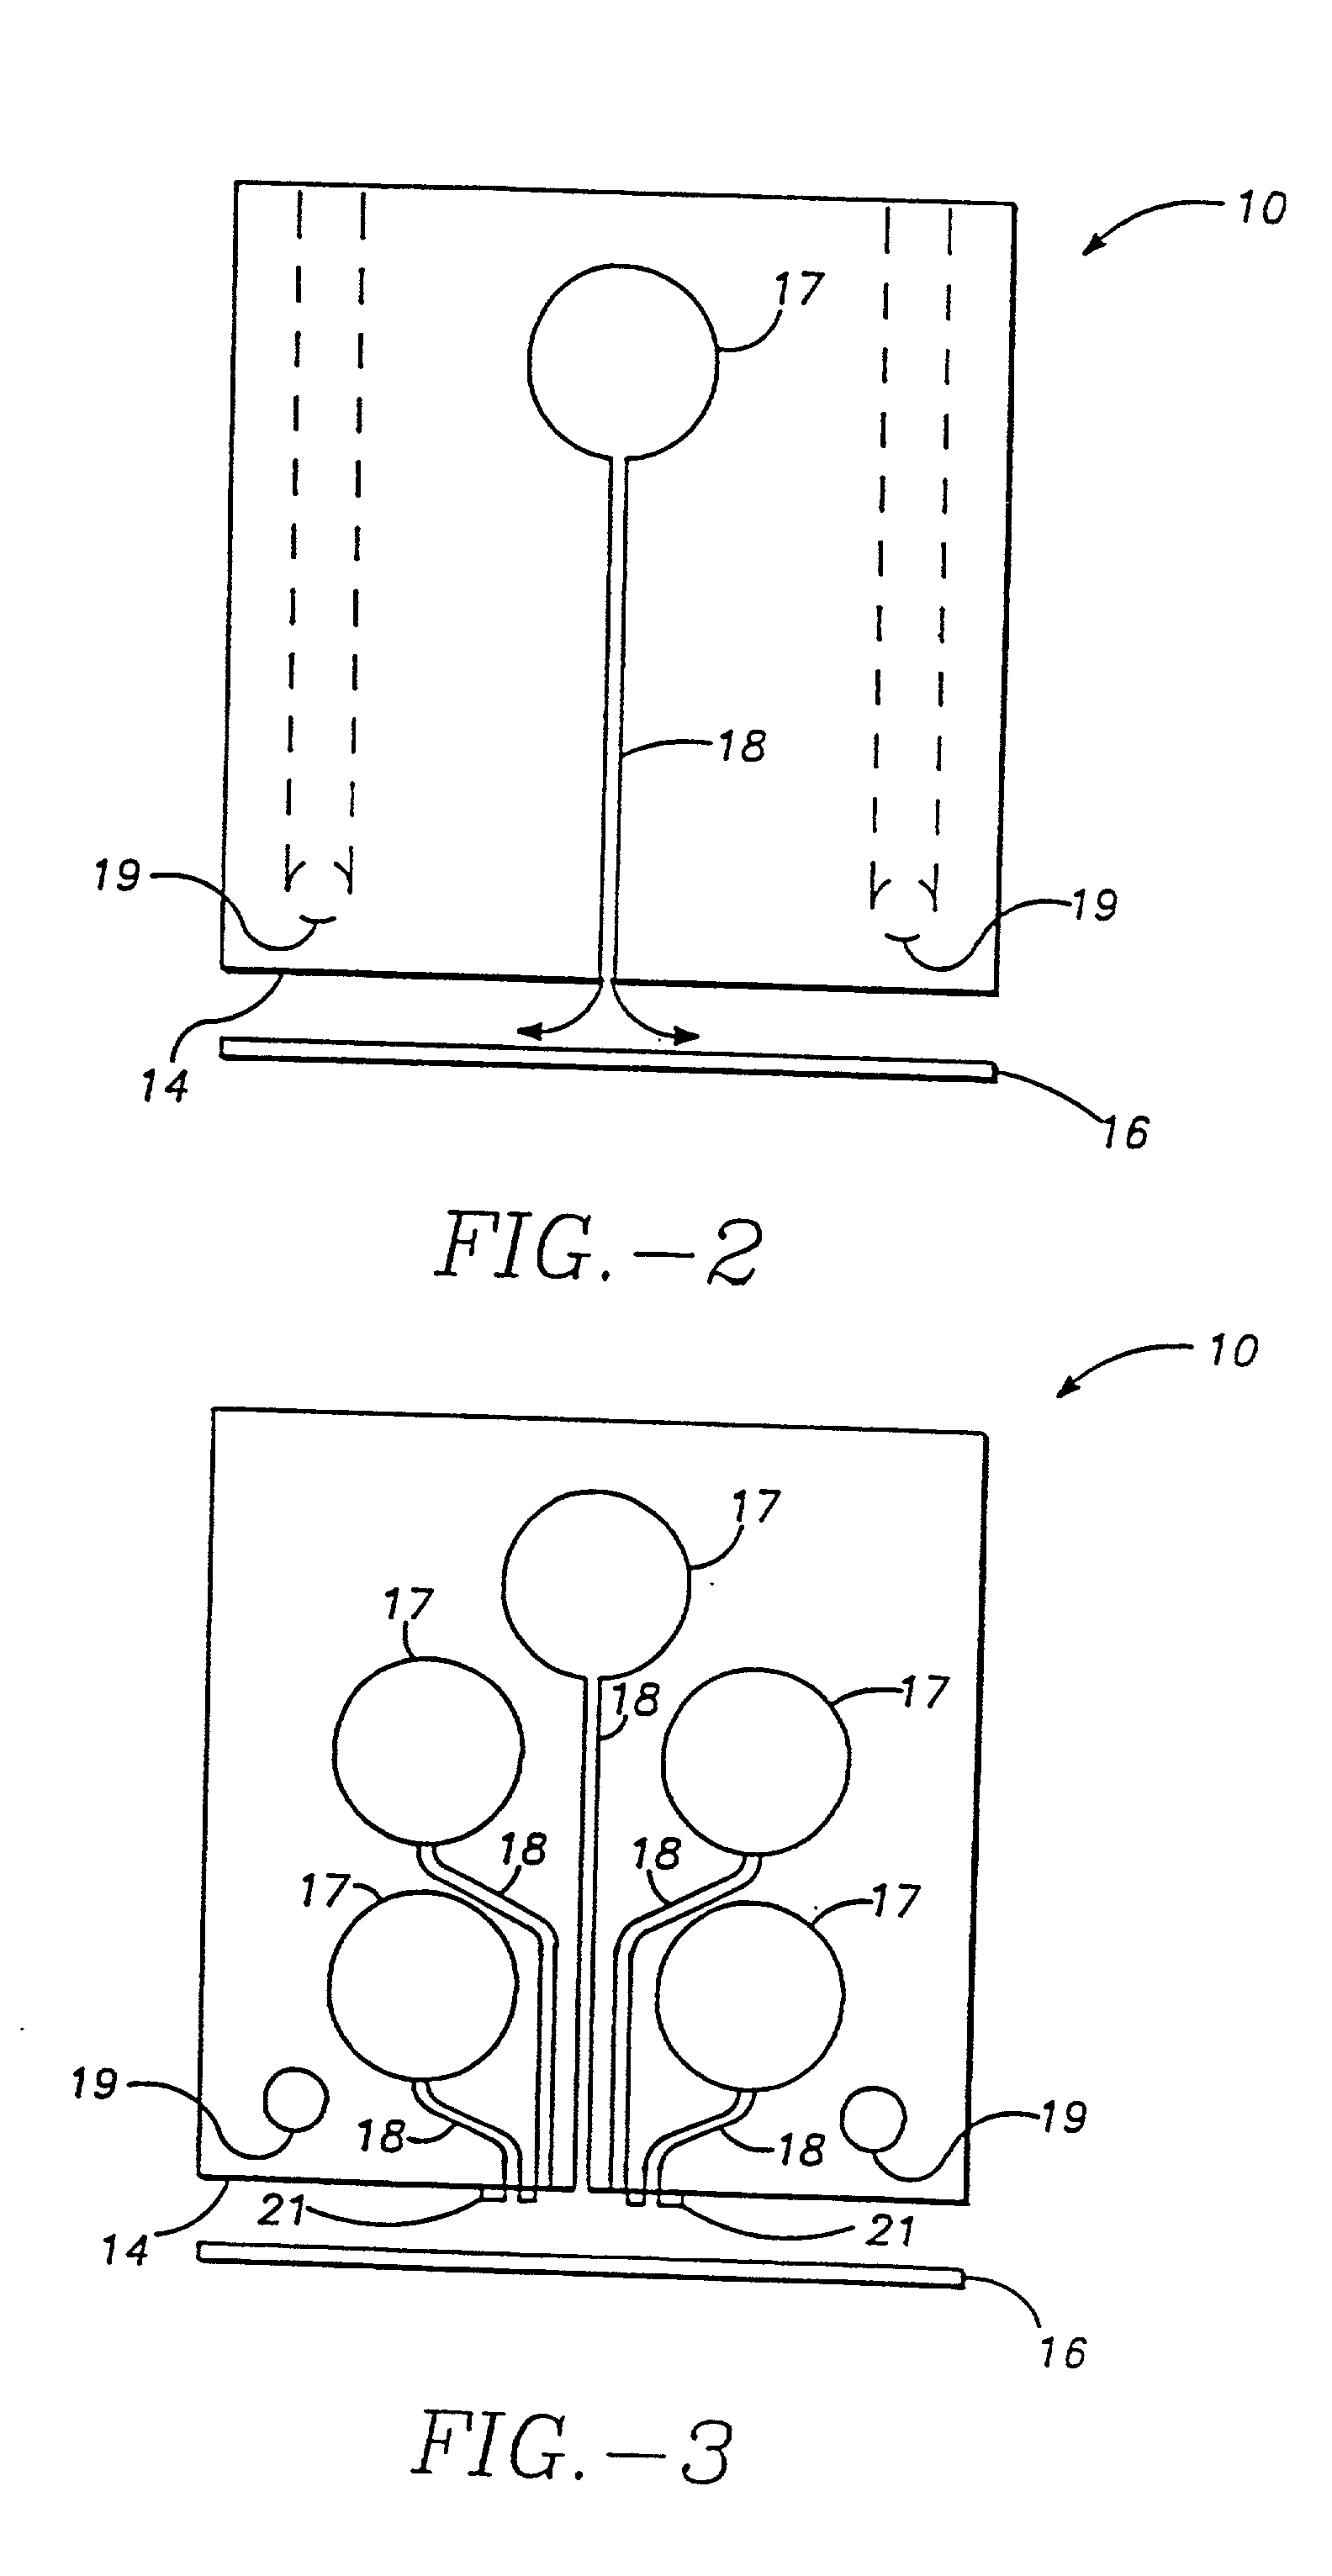 Single body injector and deposition chamber